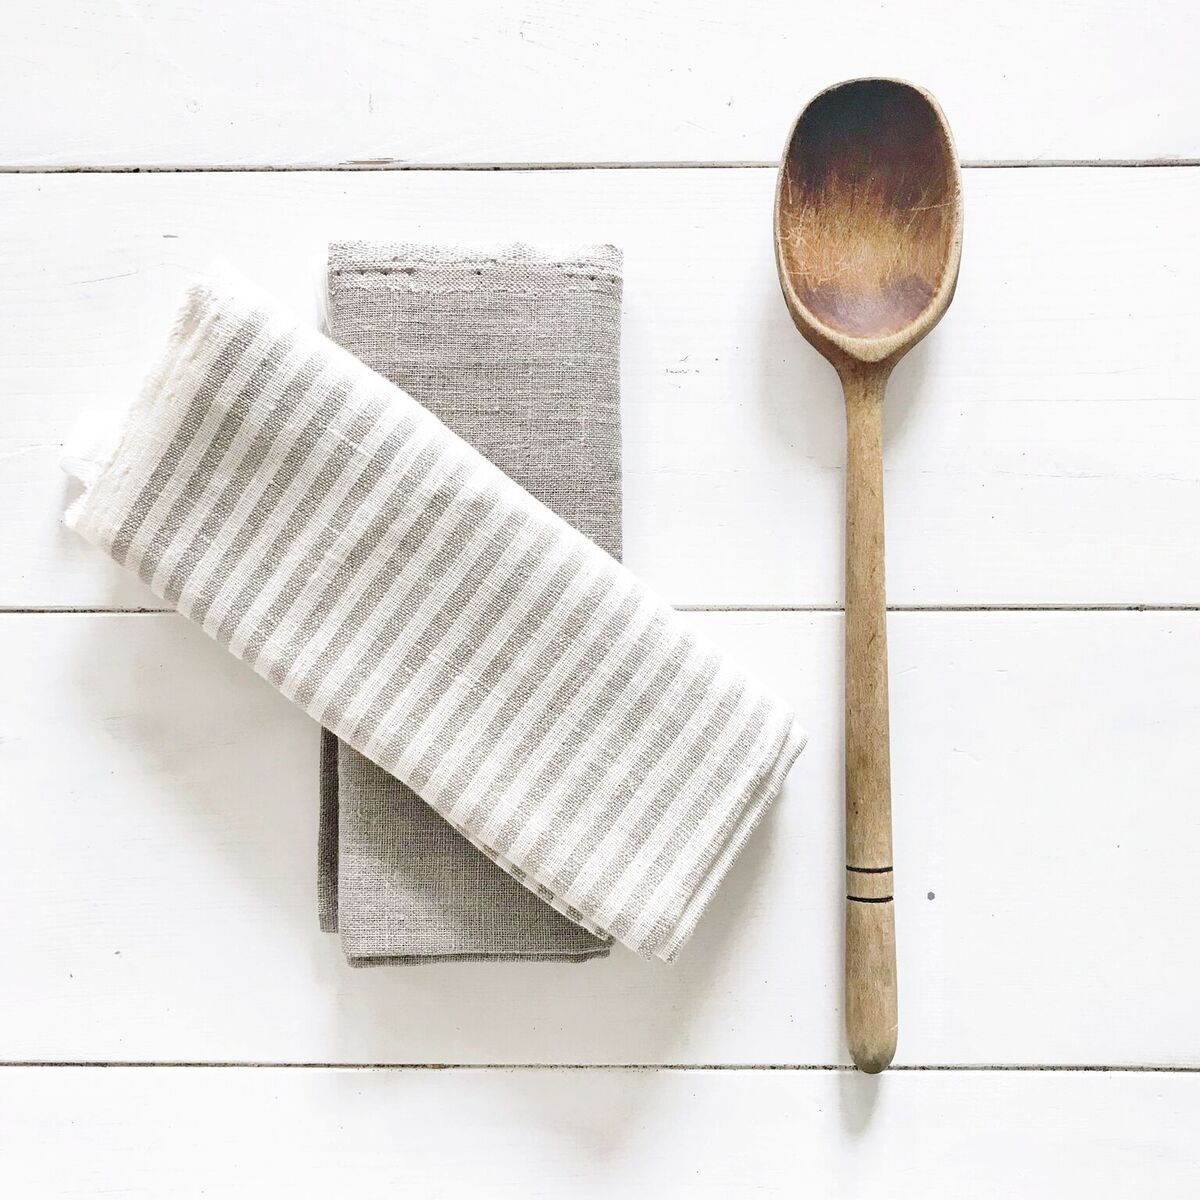 Gifts made with love for the foodie on your list! Like this perfect linen napkin set.